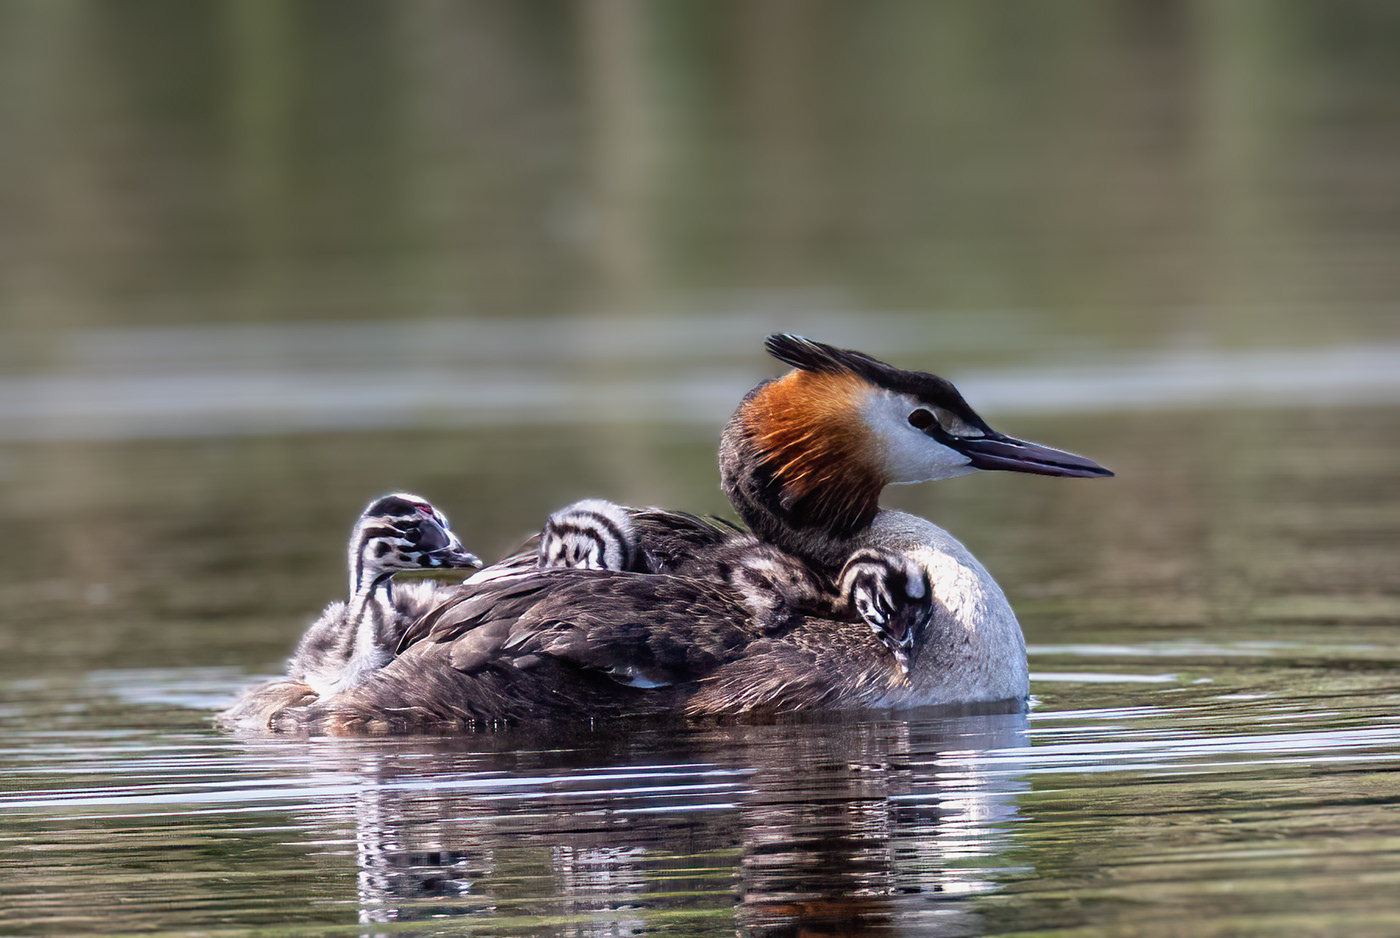 grebe waterbird Nature Great Crested wildlife nature photography grebes